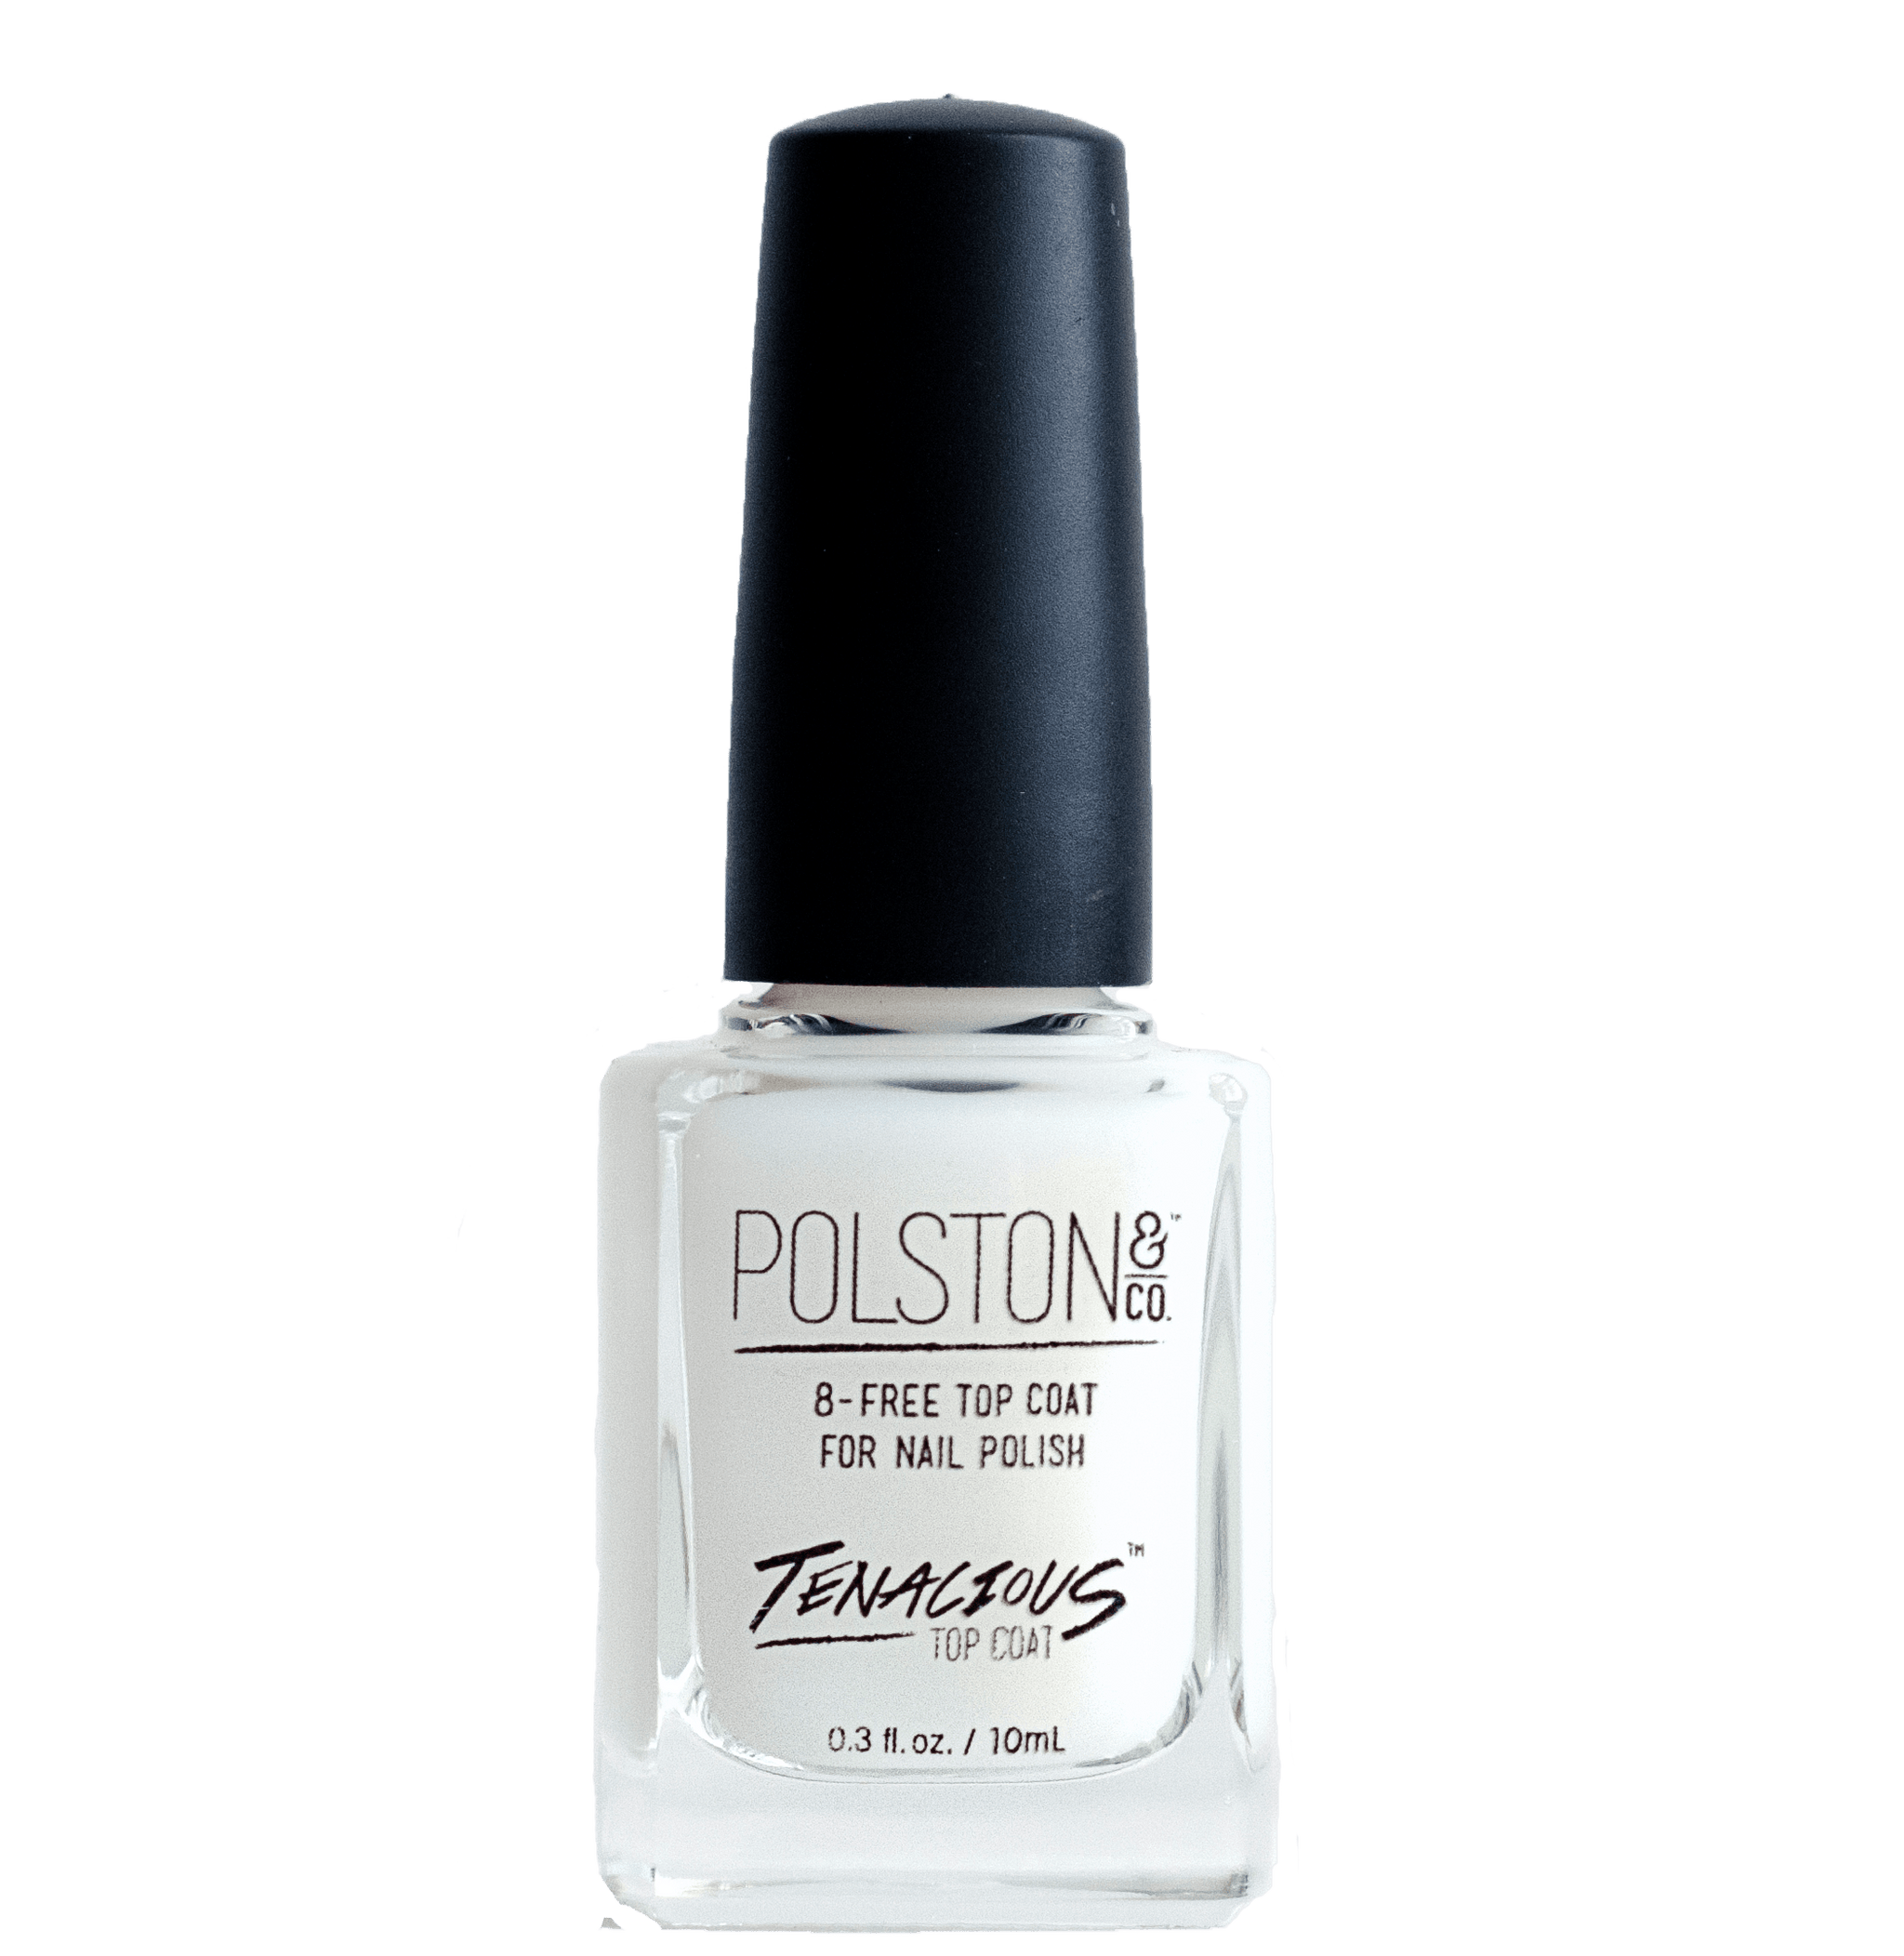 Vegan Nail Polish: The 8 Best Brands for a Cruelty-Free Mani [Guide]